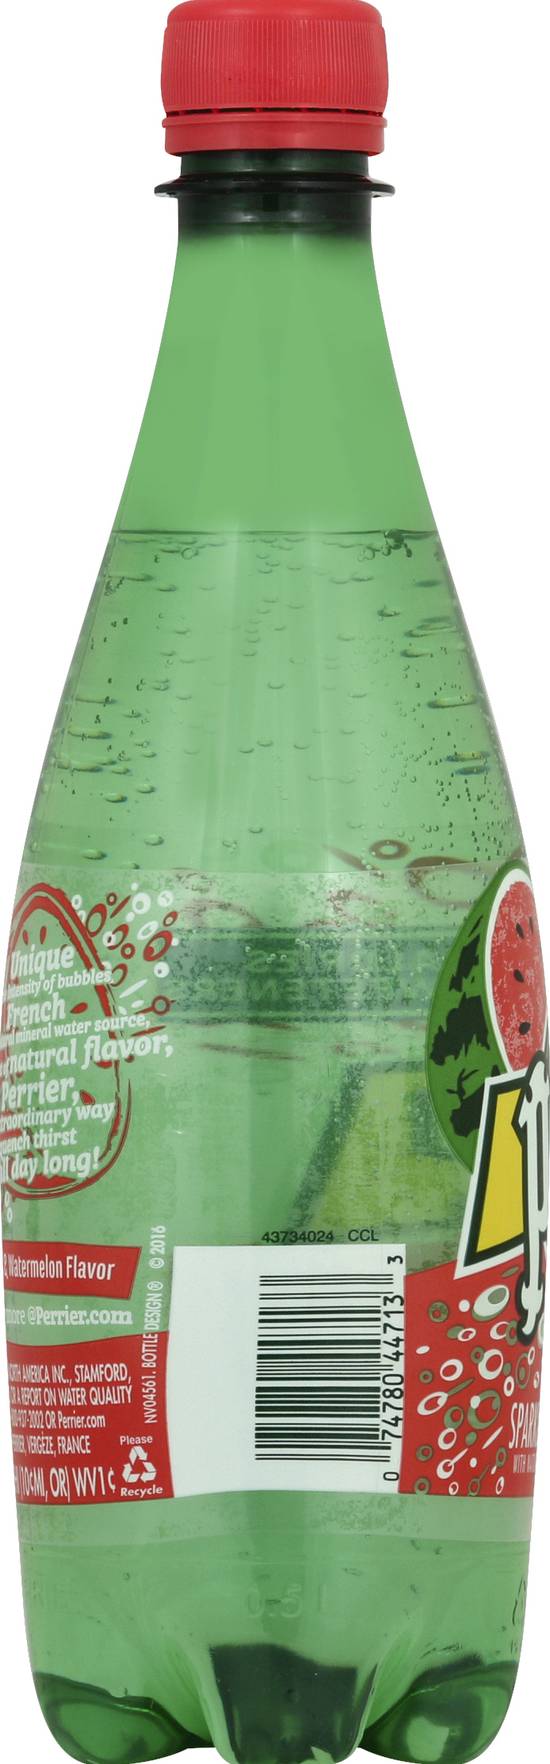 Perrier Watermelon Flavored Carbonated Mineral Water (16.9 fl oz)